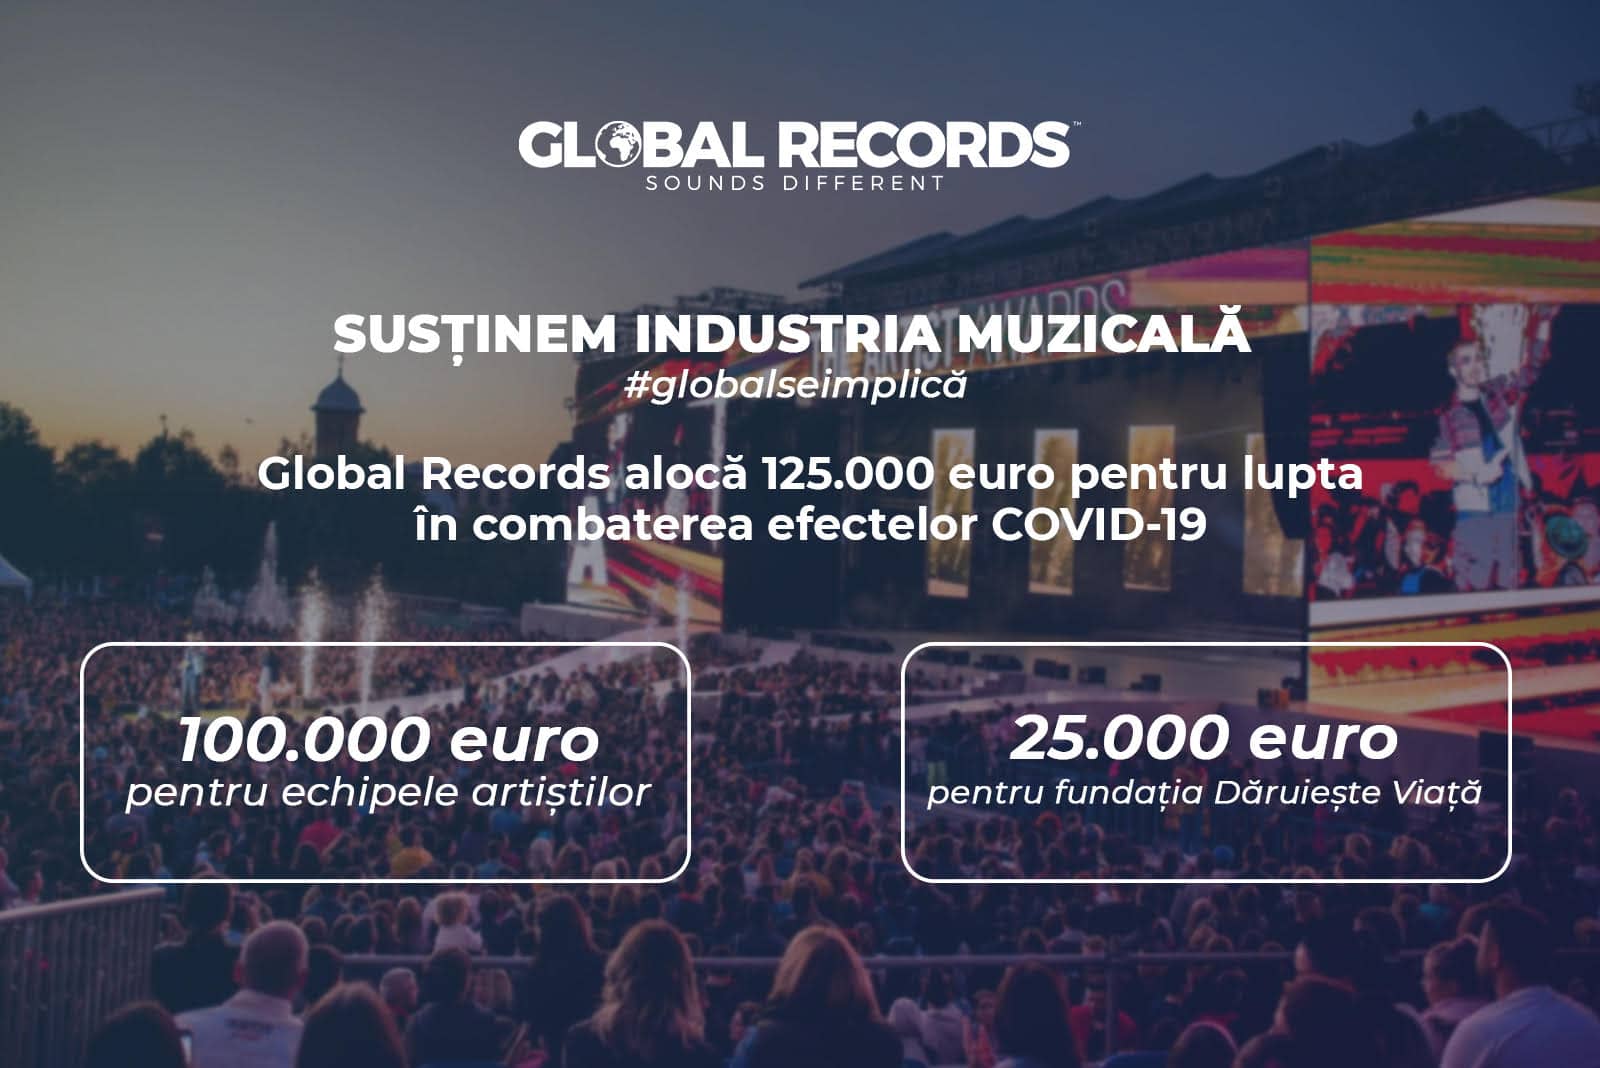 global-records-donatii